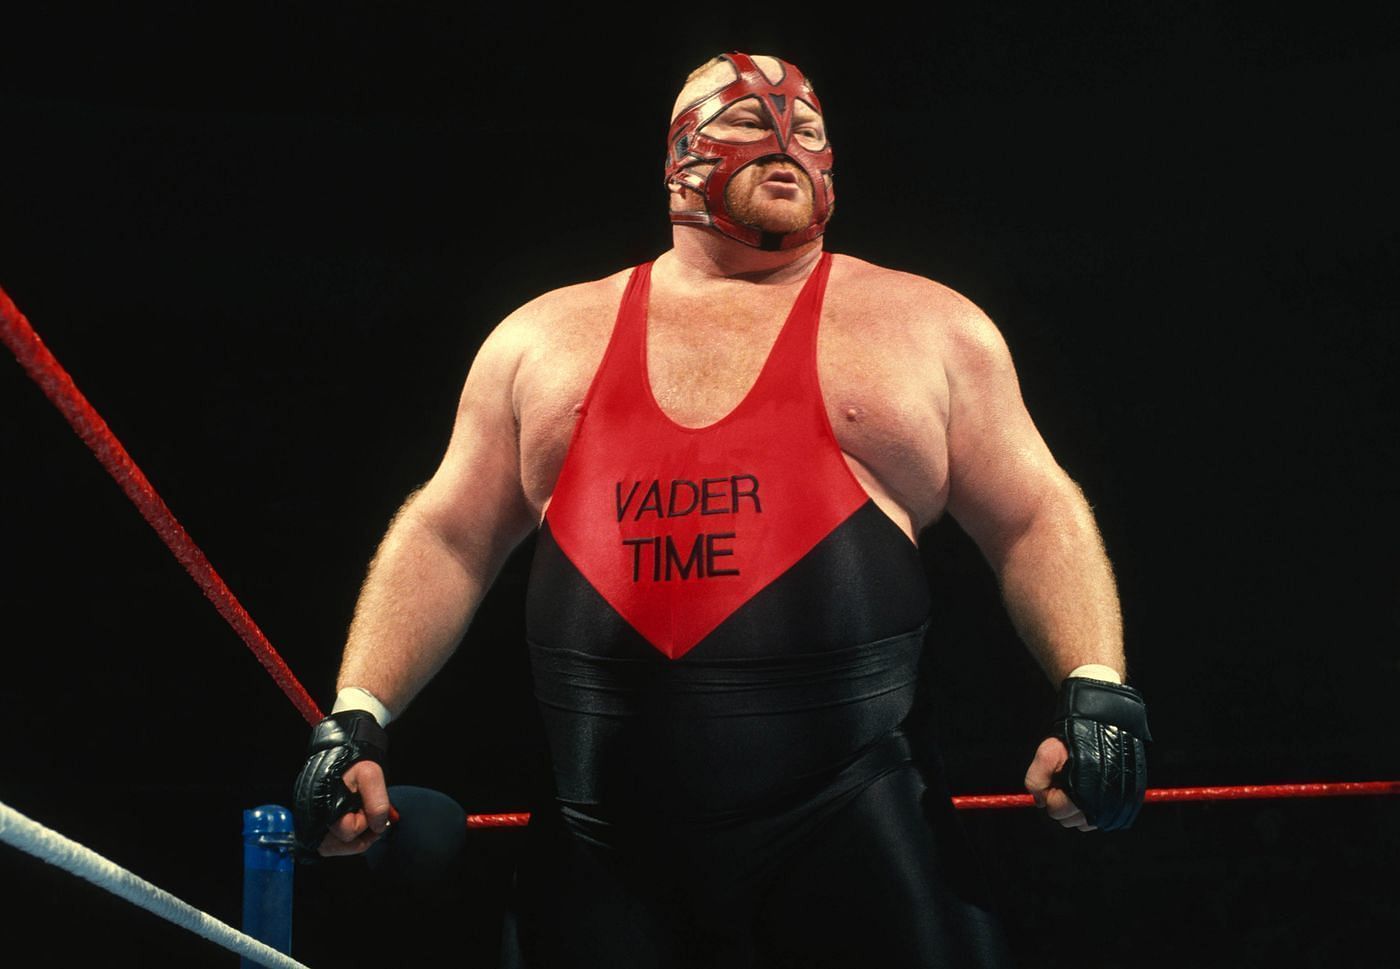 Vader is a three-time WCW Champion